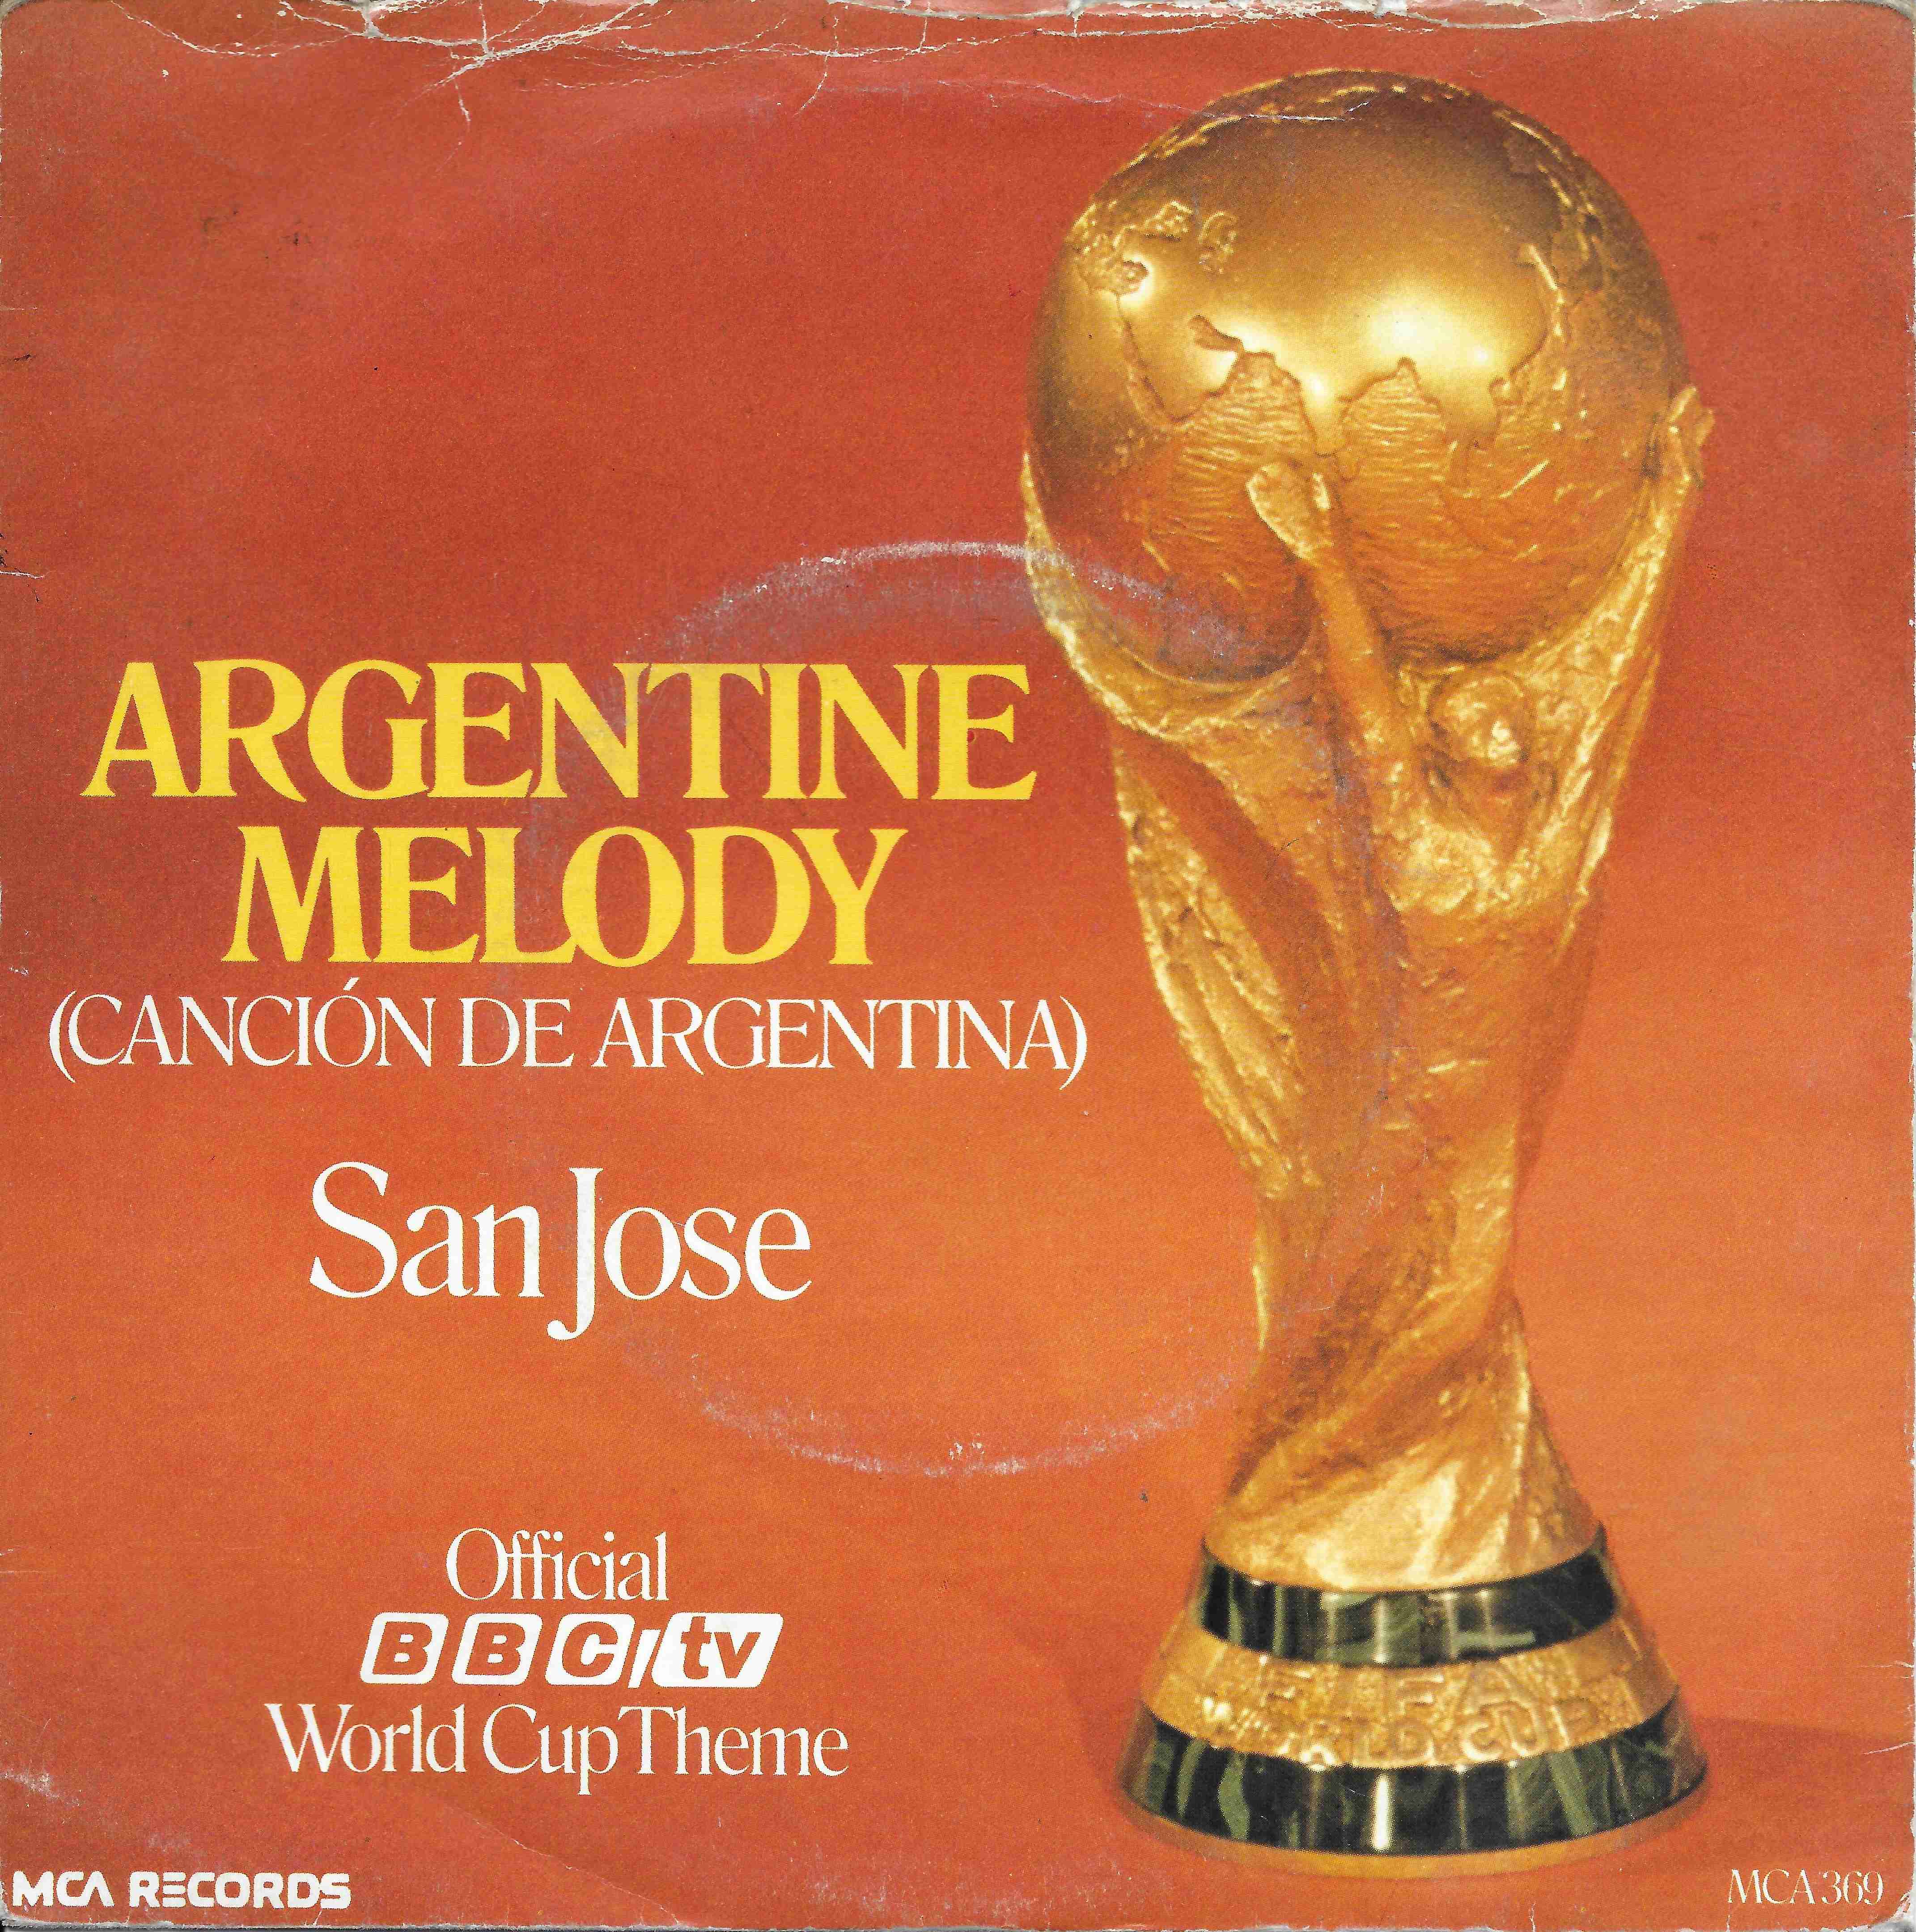 Picture of Argentine melody (World Cup (1978)) by artist Andrew Lloyd Webber / San Jose from the BBC singles - Records and Tapes library